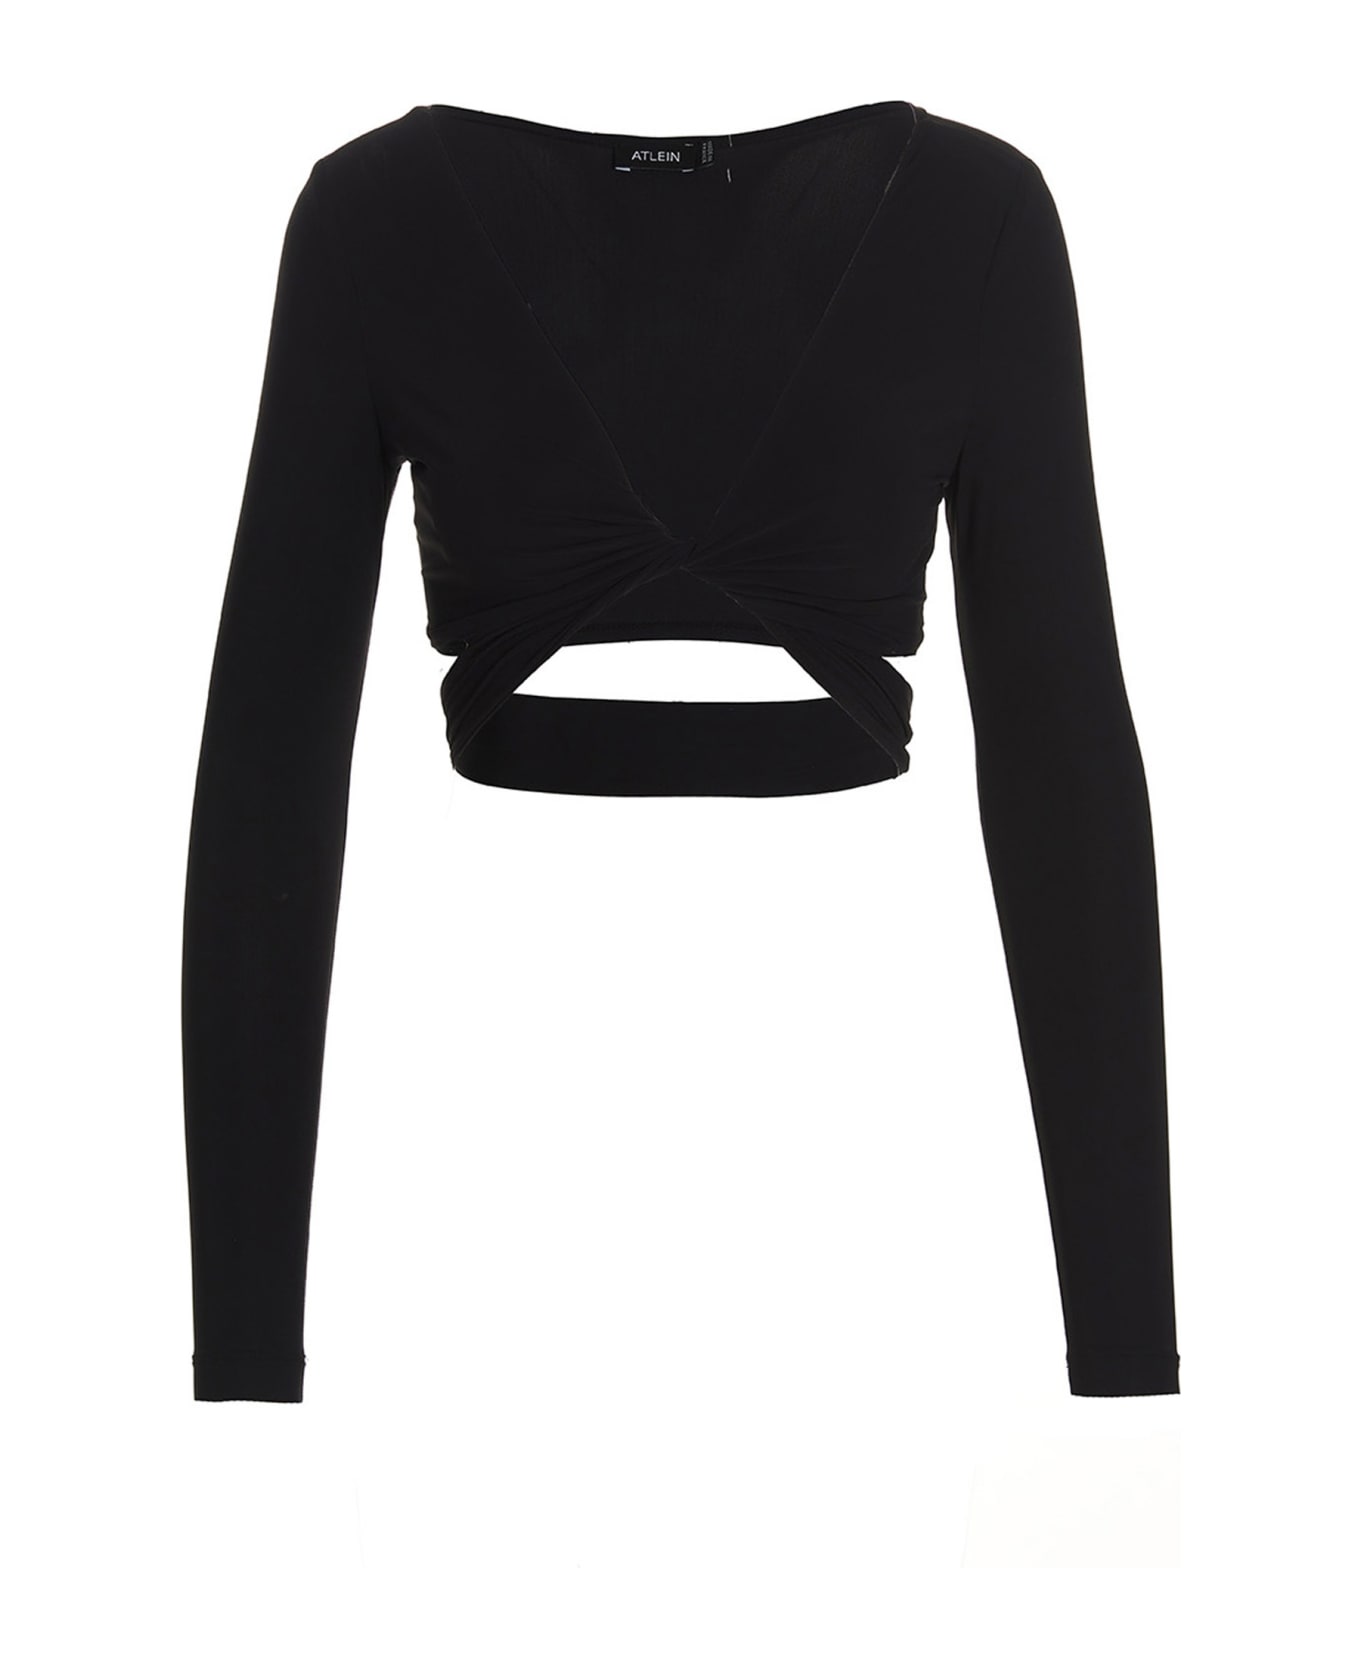 Atlein Crossed Cropped Top - Black  